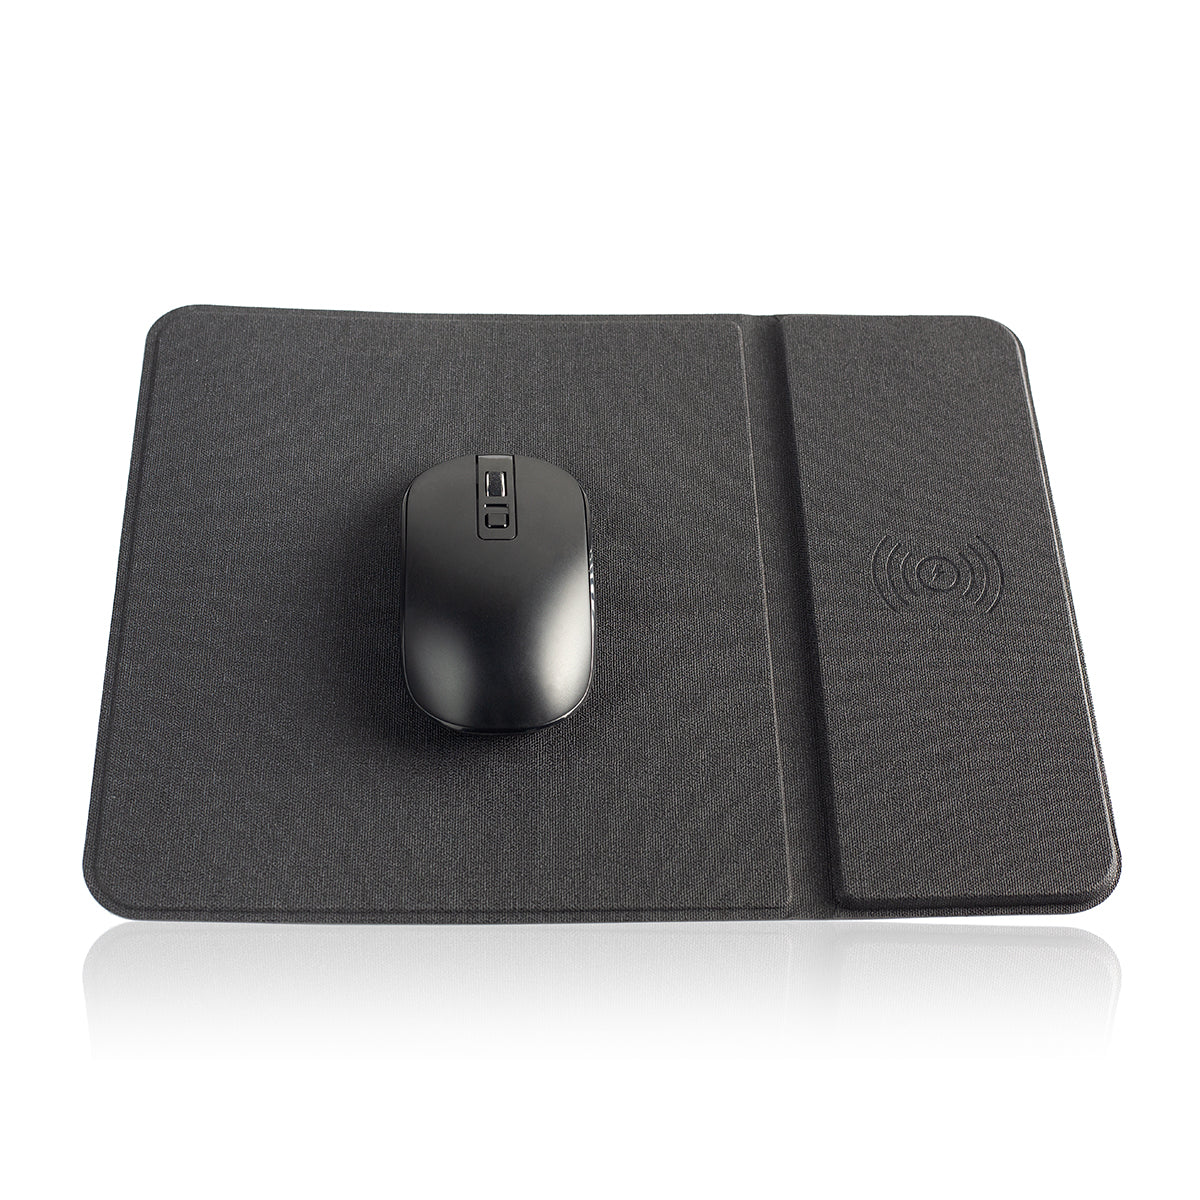 Indiid Combo Mouse pad Pro